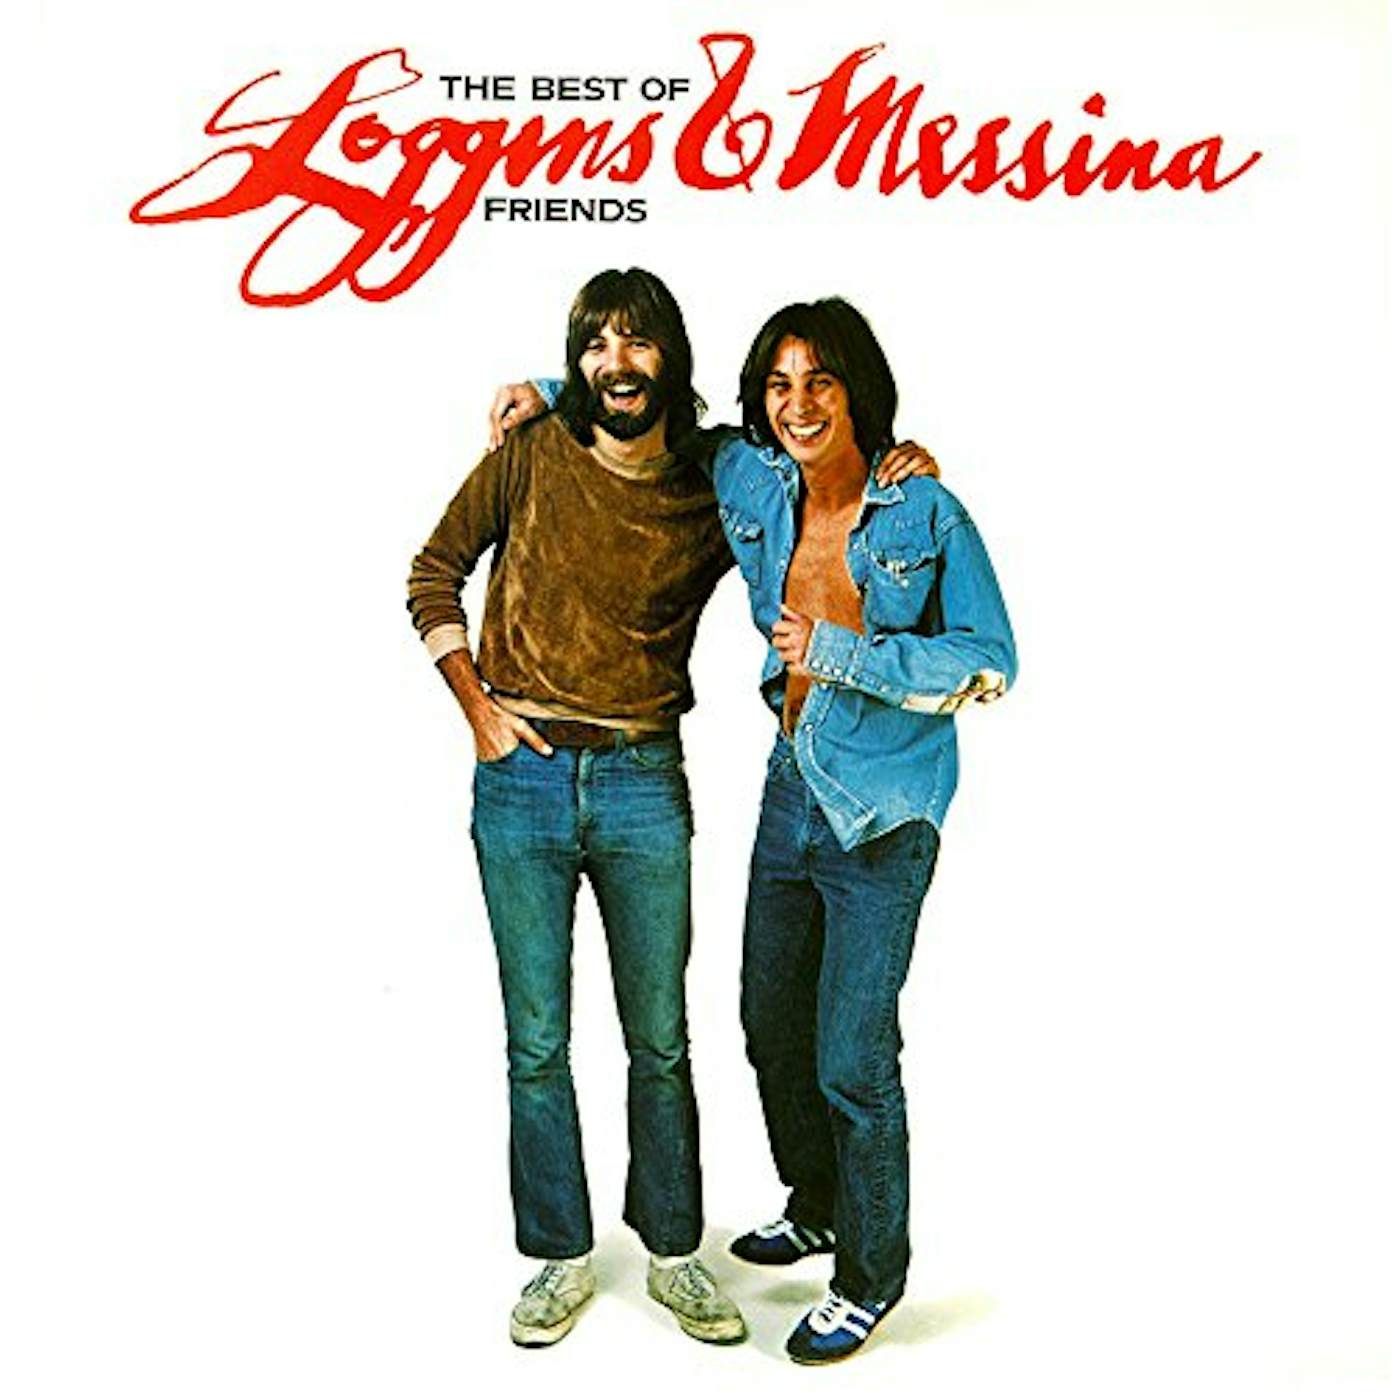 Loggins & Messina BEST OF FRIENDS-GREATEST HITS Vinyl Record